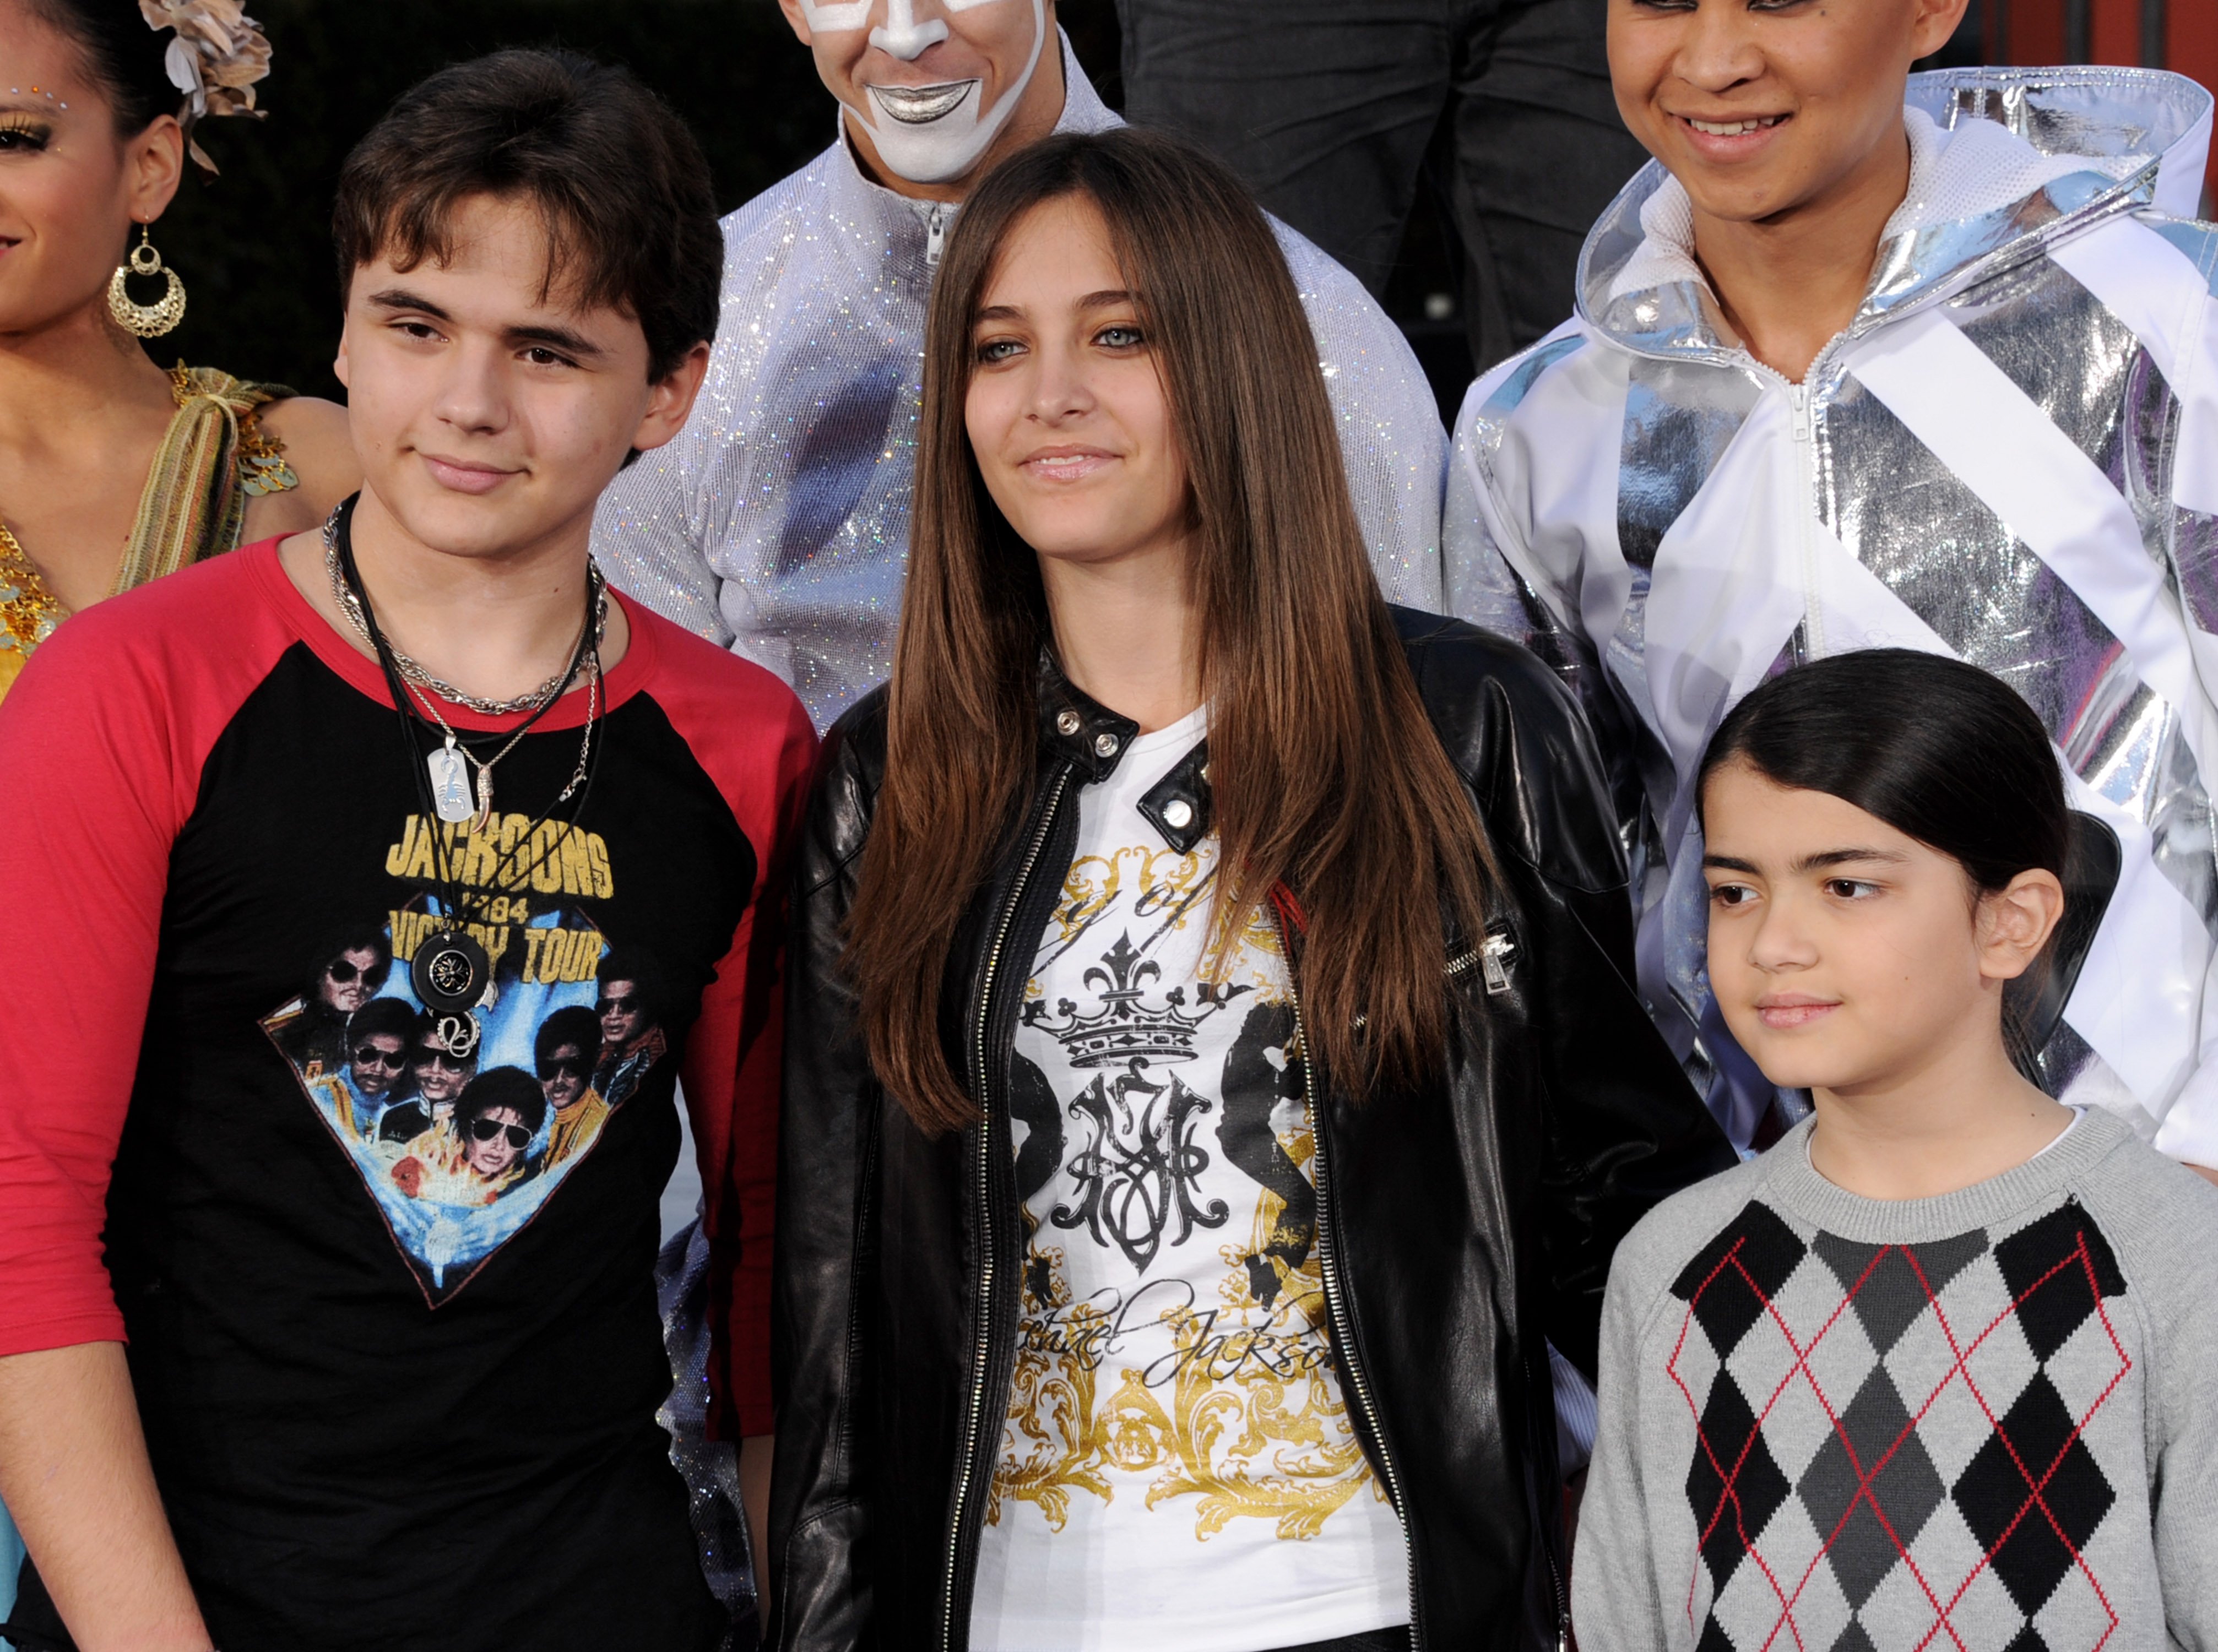 Prince Jackson, Paris Jackson and Blanket Jackson appear at the Michael Jackson Hand and Footprint ceremony at Grauman's Chinese Theatre. | Photo: GettyImages